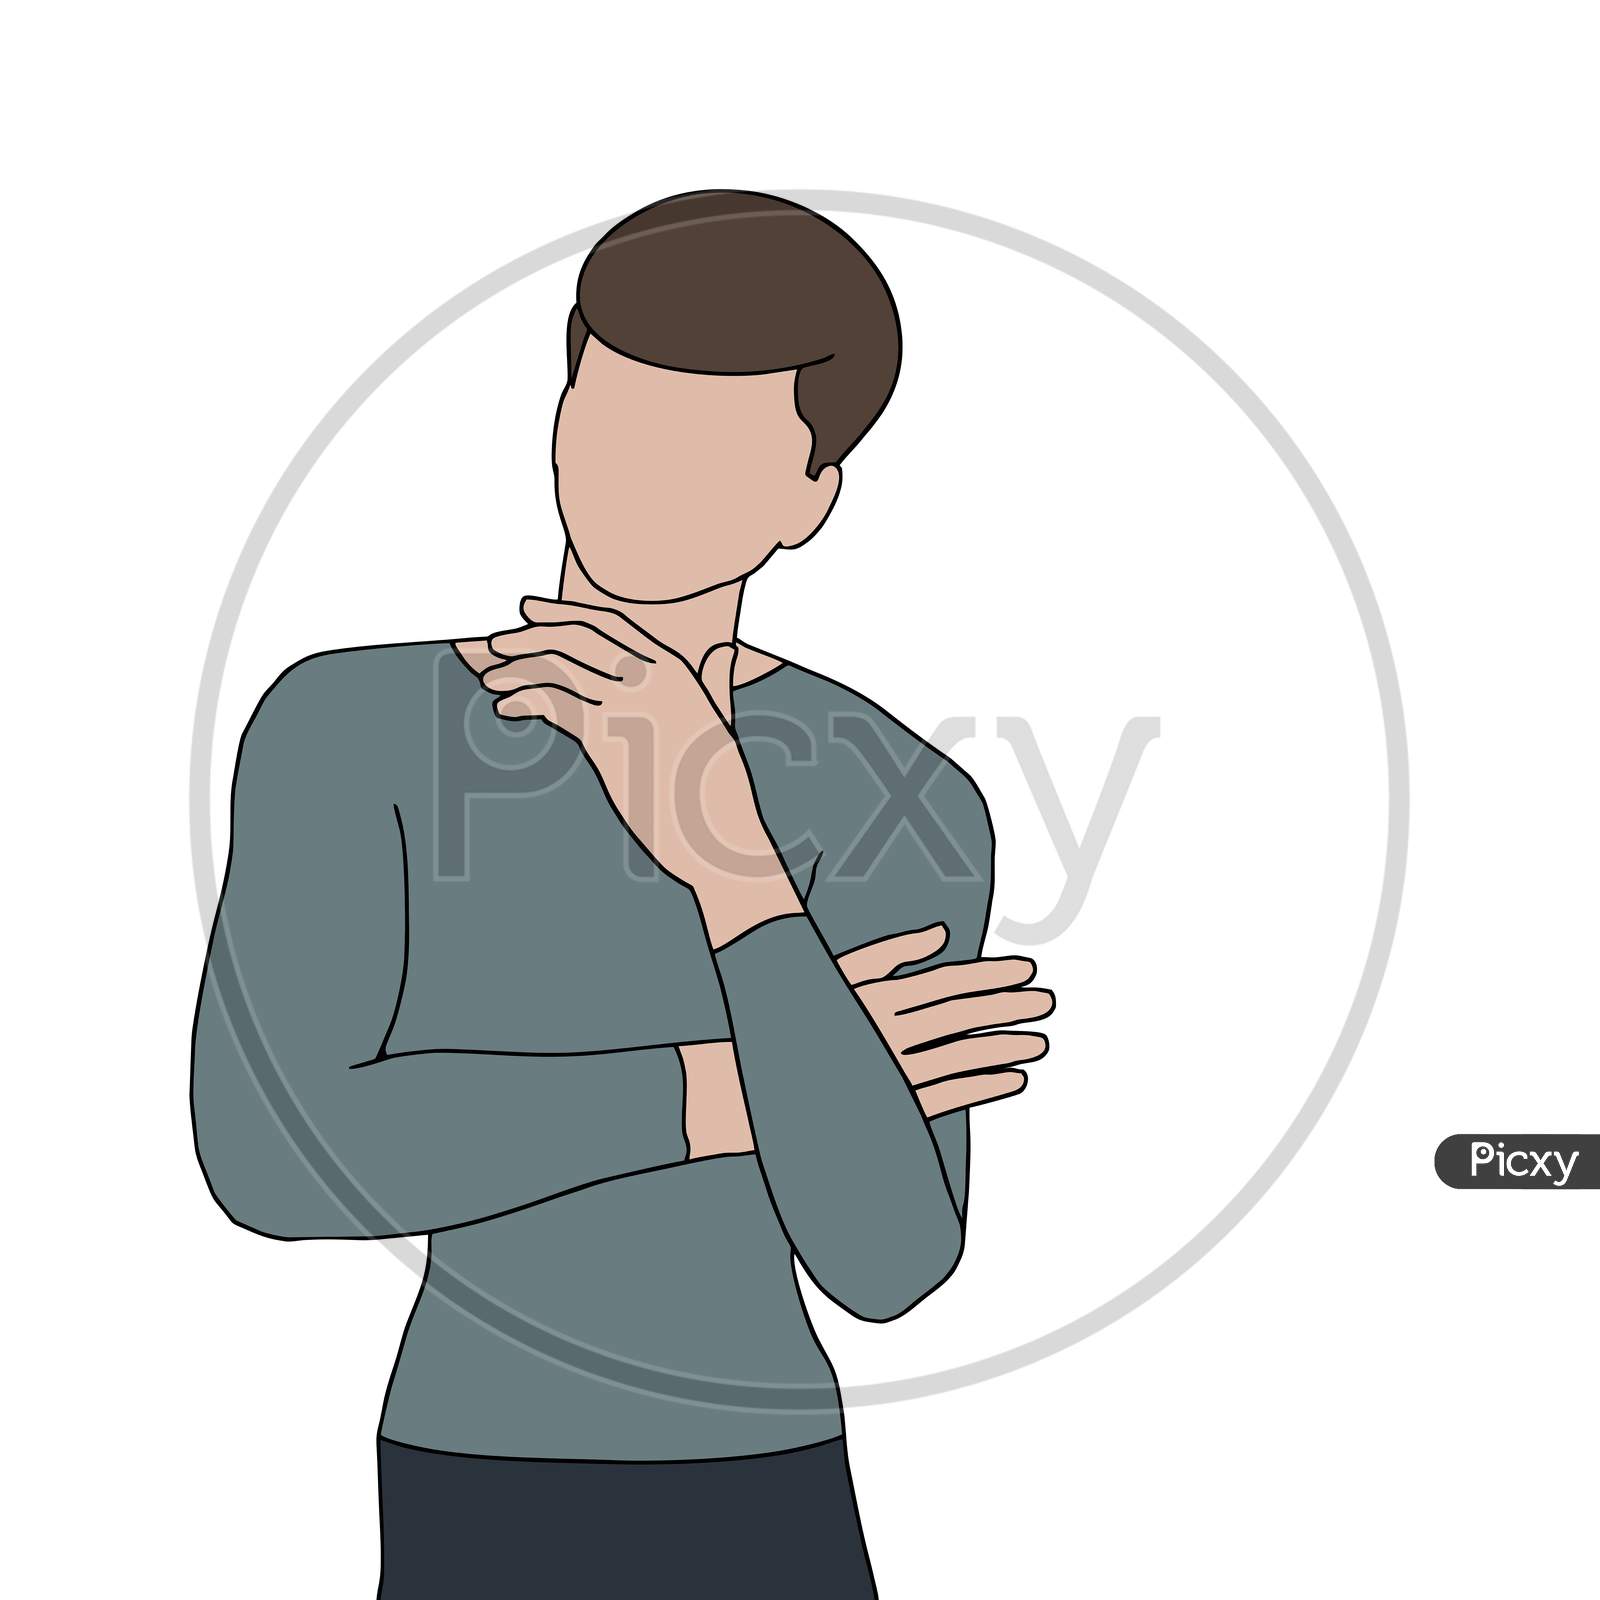 Miserable Depressed Man Sitting And Thinking Man In A Thinker Pose 3d Model  Of Man Vector Stock Illustration - Download Image Now - iStock